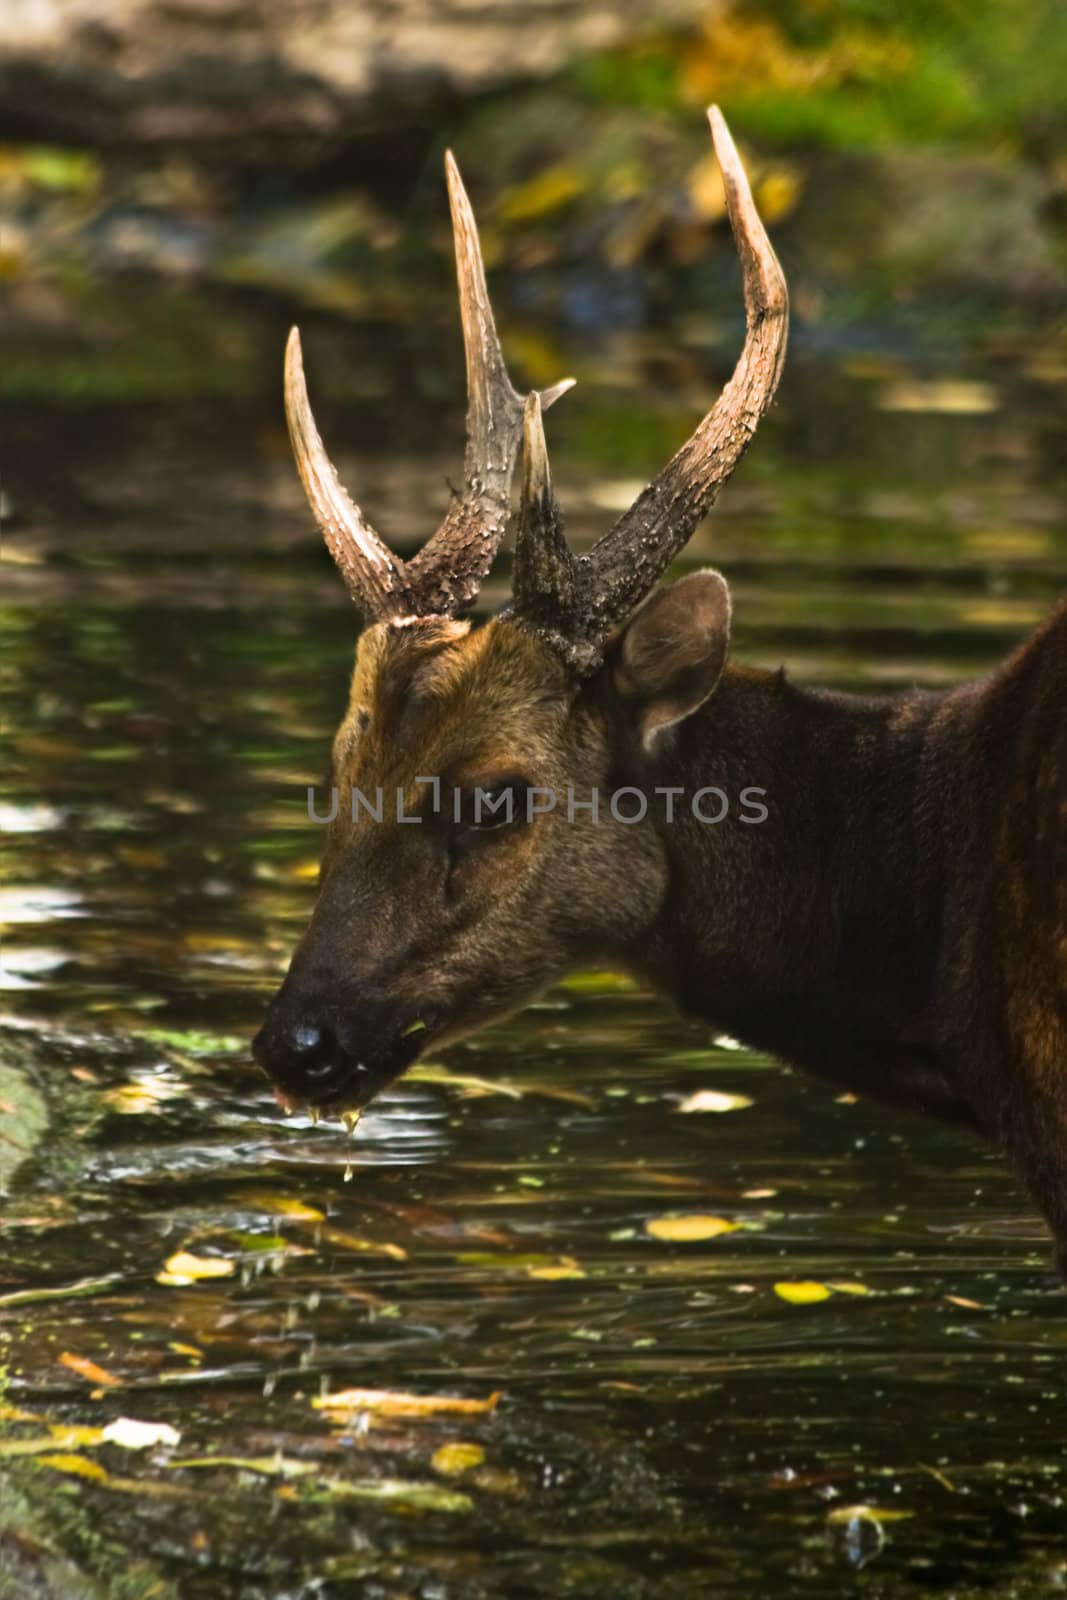 Philppine spotted deer eating fallen leaves by Colette